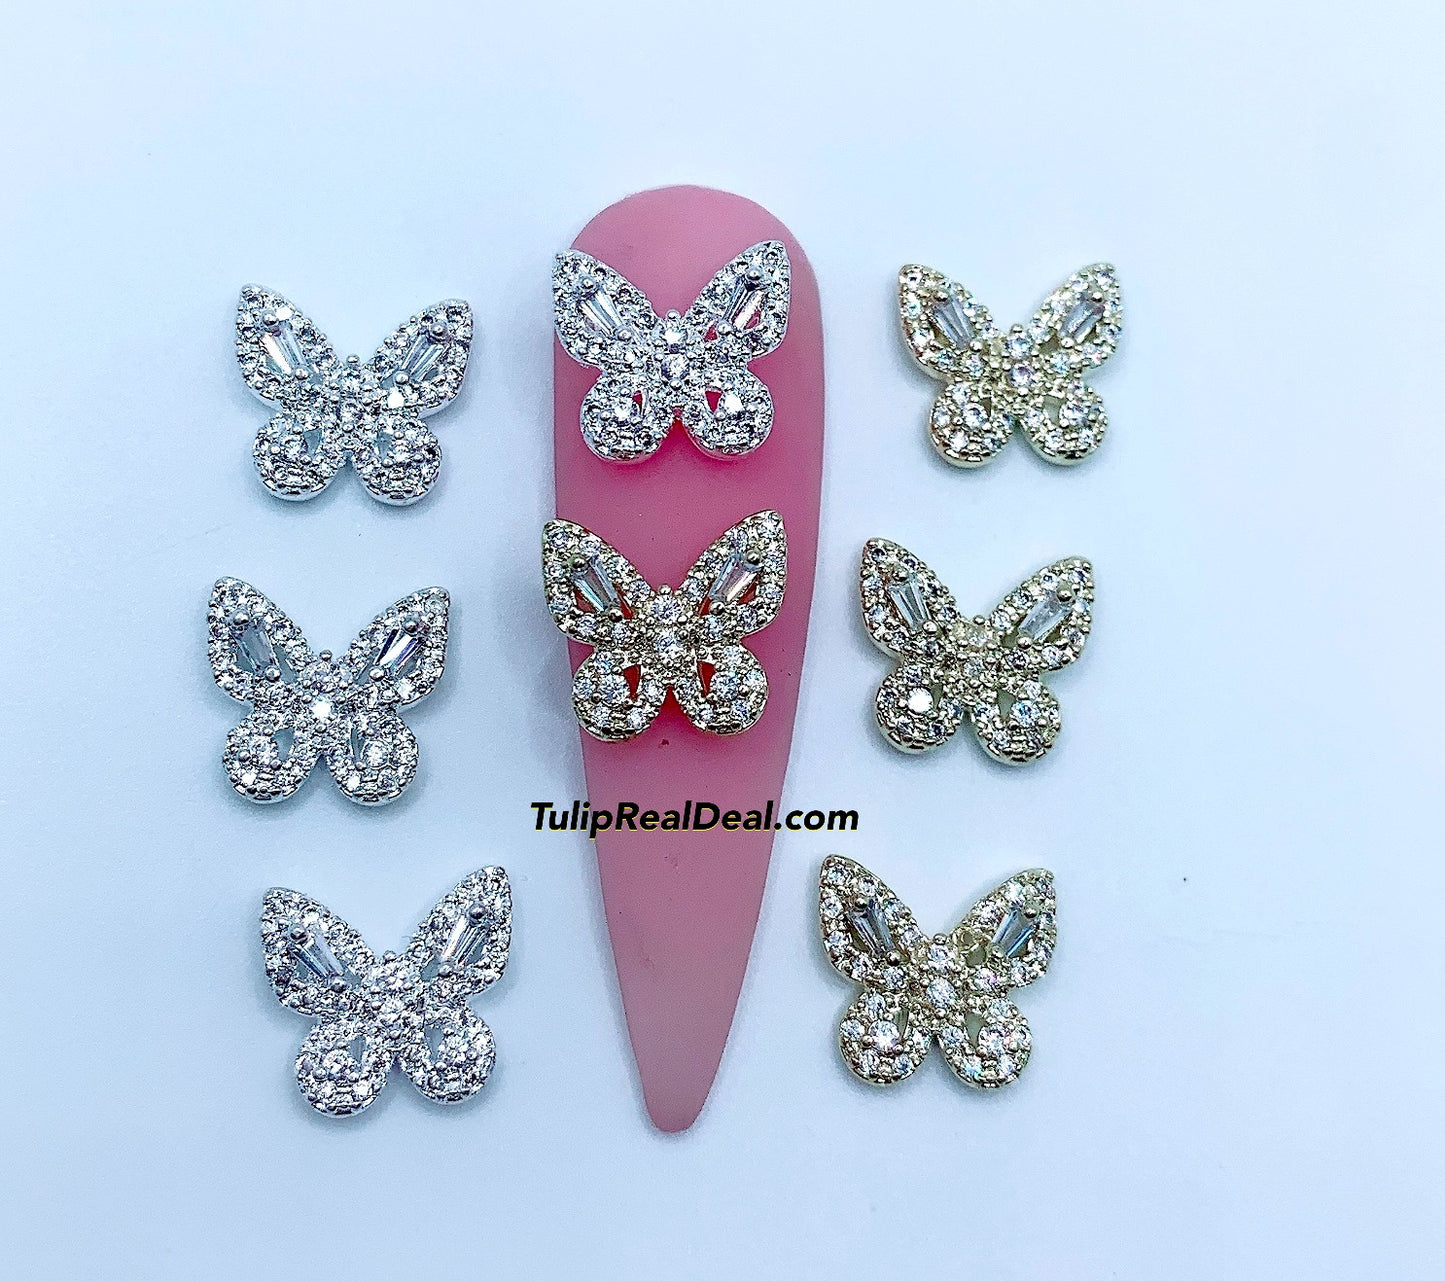 Zircon Bling Butterfly 3D charms 5pcs